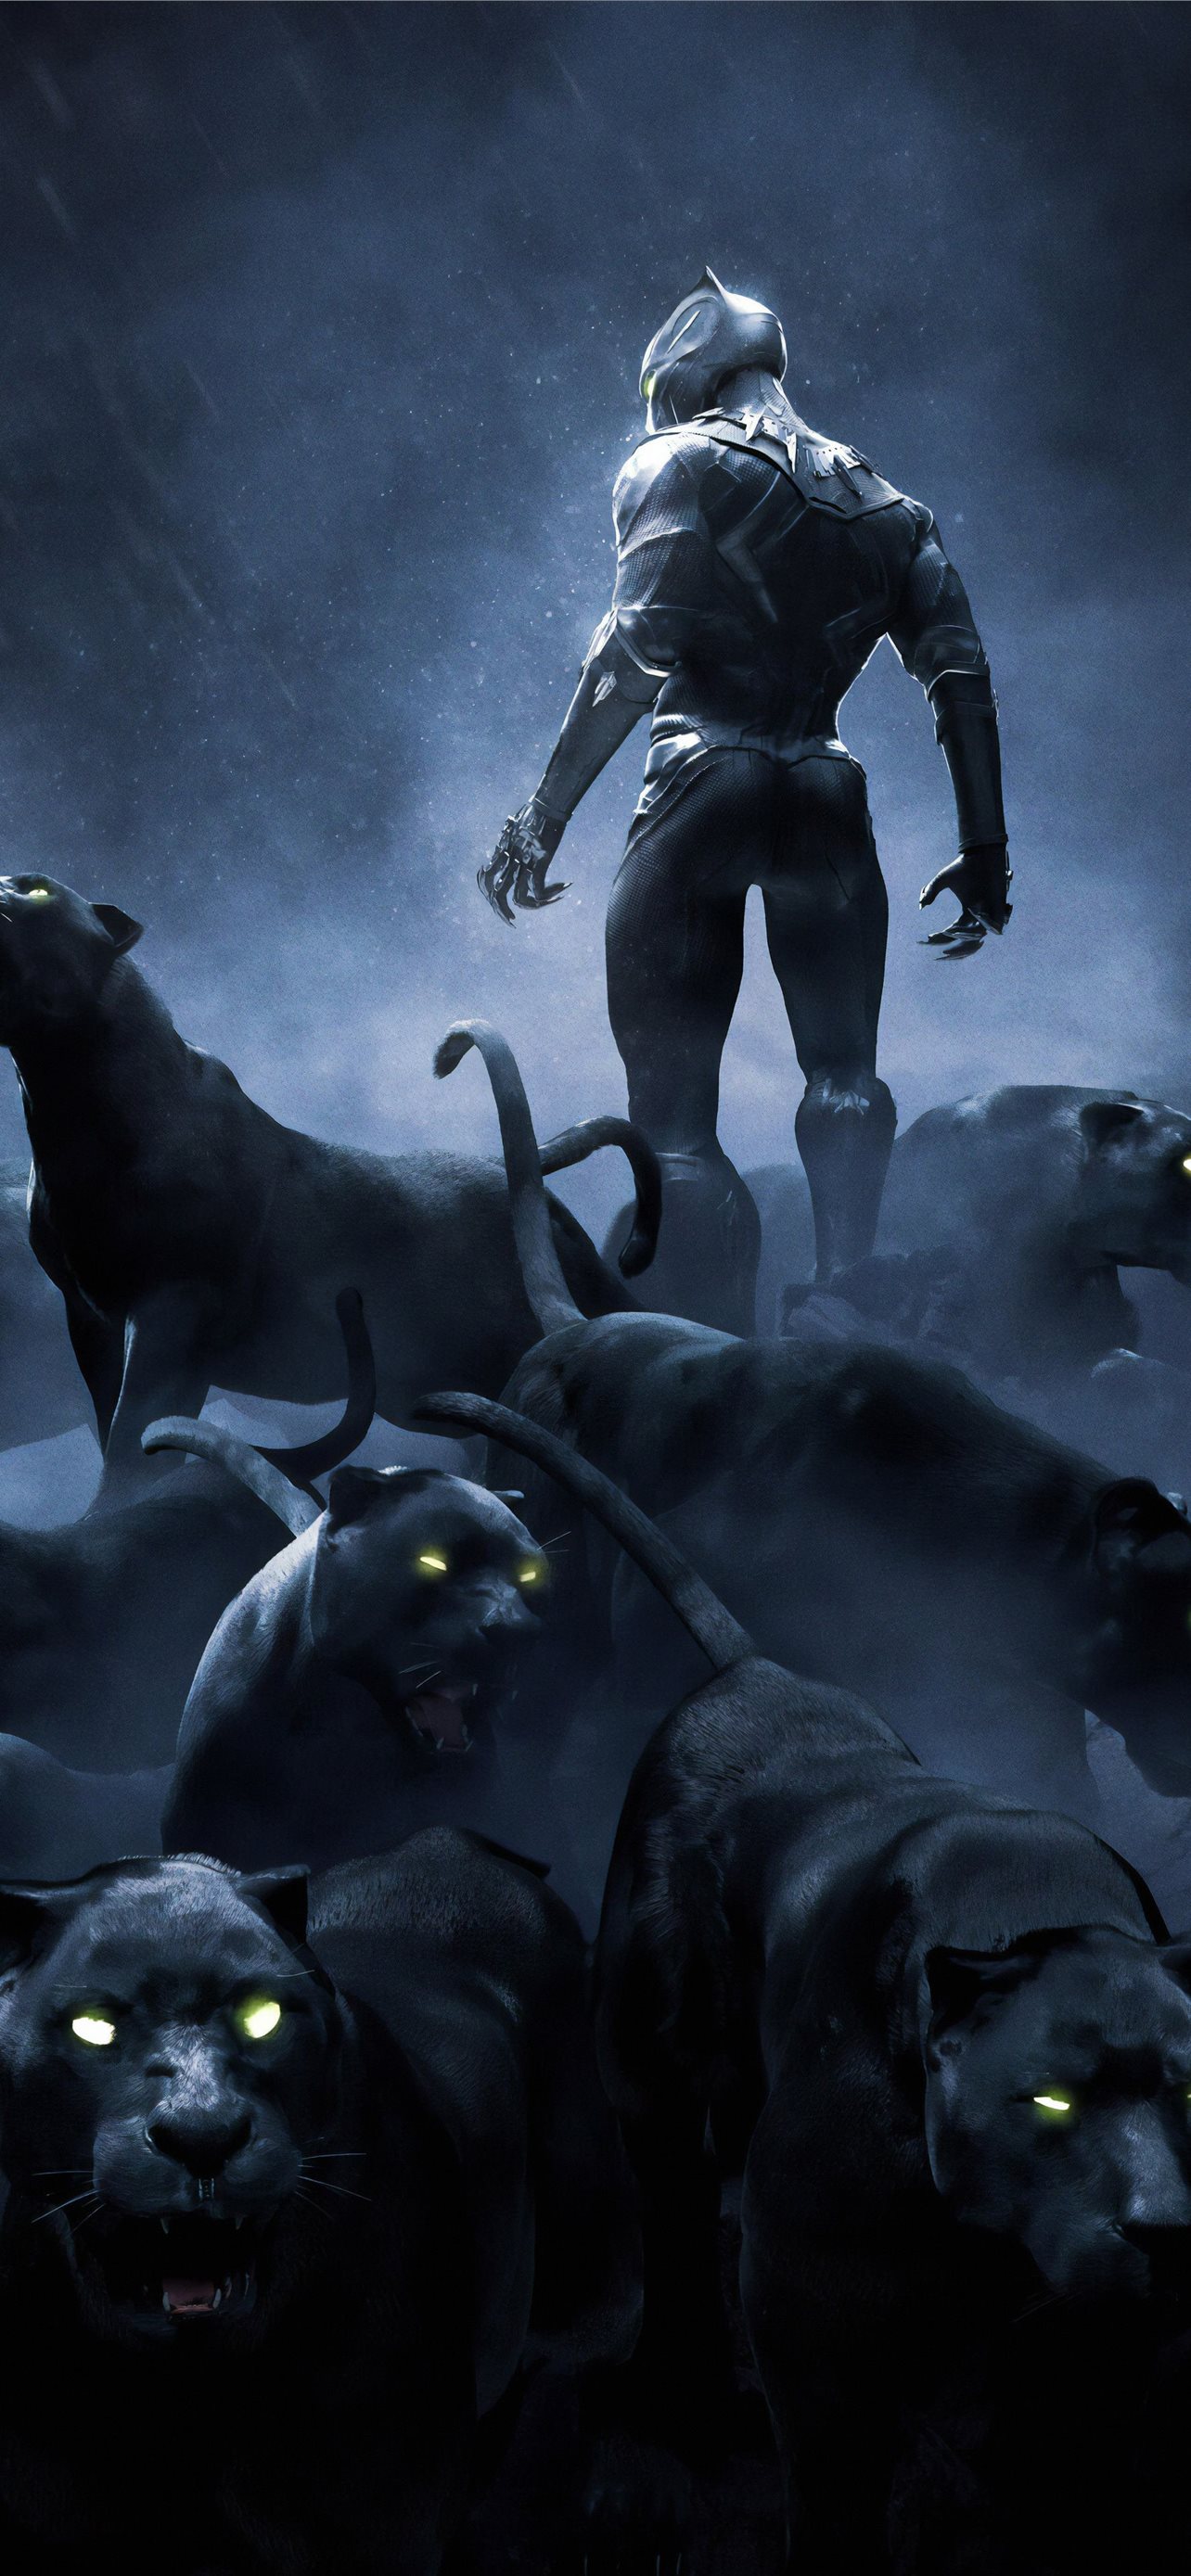 Black Panther Rise Up 4k In Resolution iPhone Wallpaper Free Download